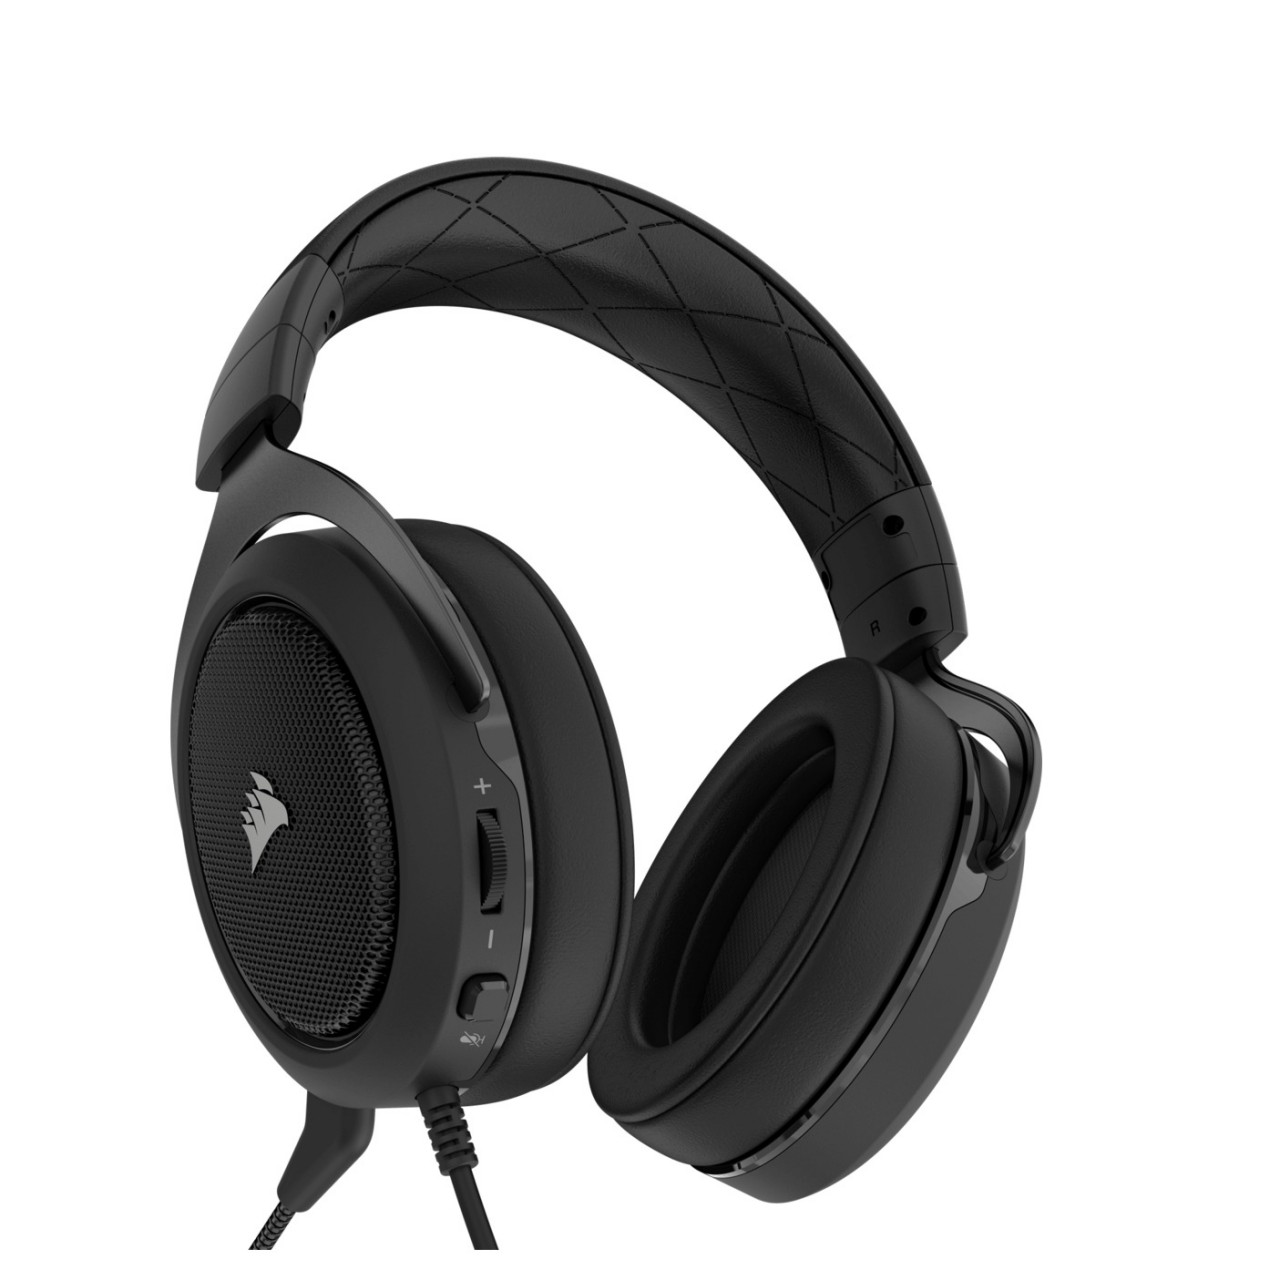 11. Corsair Gaming Headset HS60 SURROUND — Carbon (AP) – Wired – Noise Cancellation Microphone